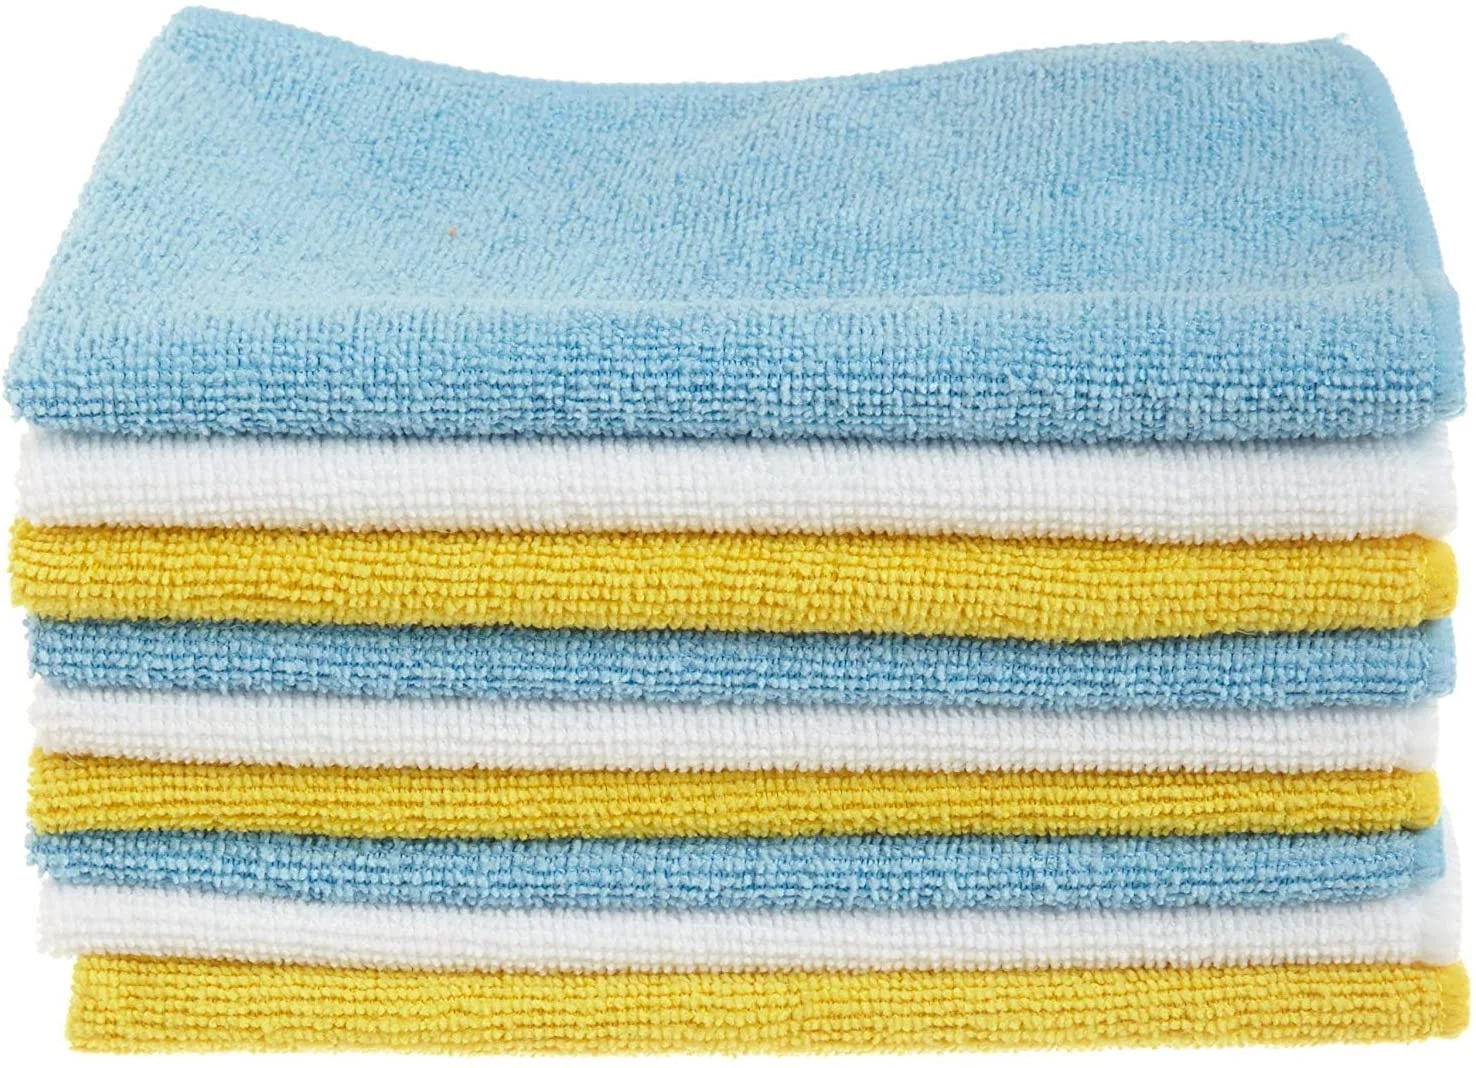 Multipurpose Plush Microfiber Cleaning Cloth Towel For Household,Car Washing ,Drying Auto Detailing - Buy Cleaning Cloth Towel,Car Washing,Drying Auto  Detailing Product on Alibaba.com